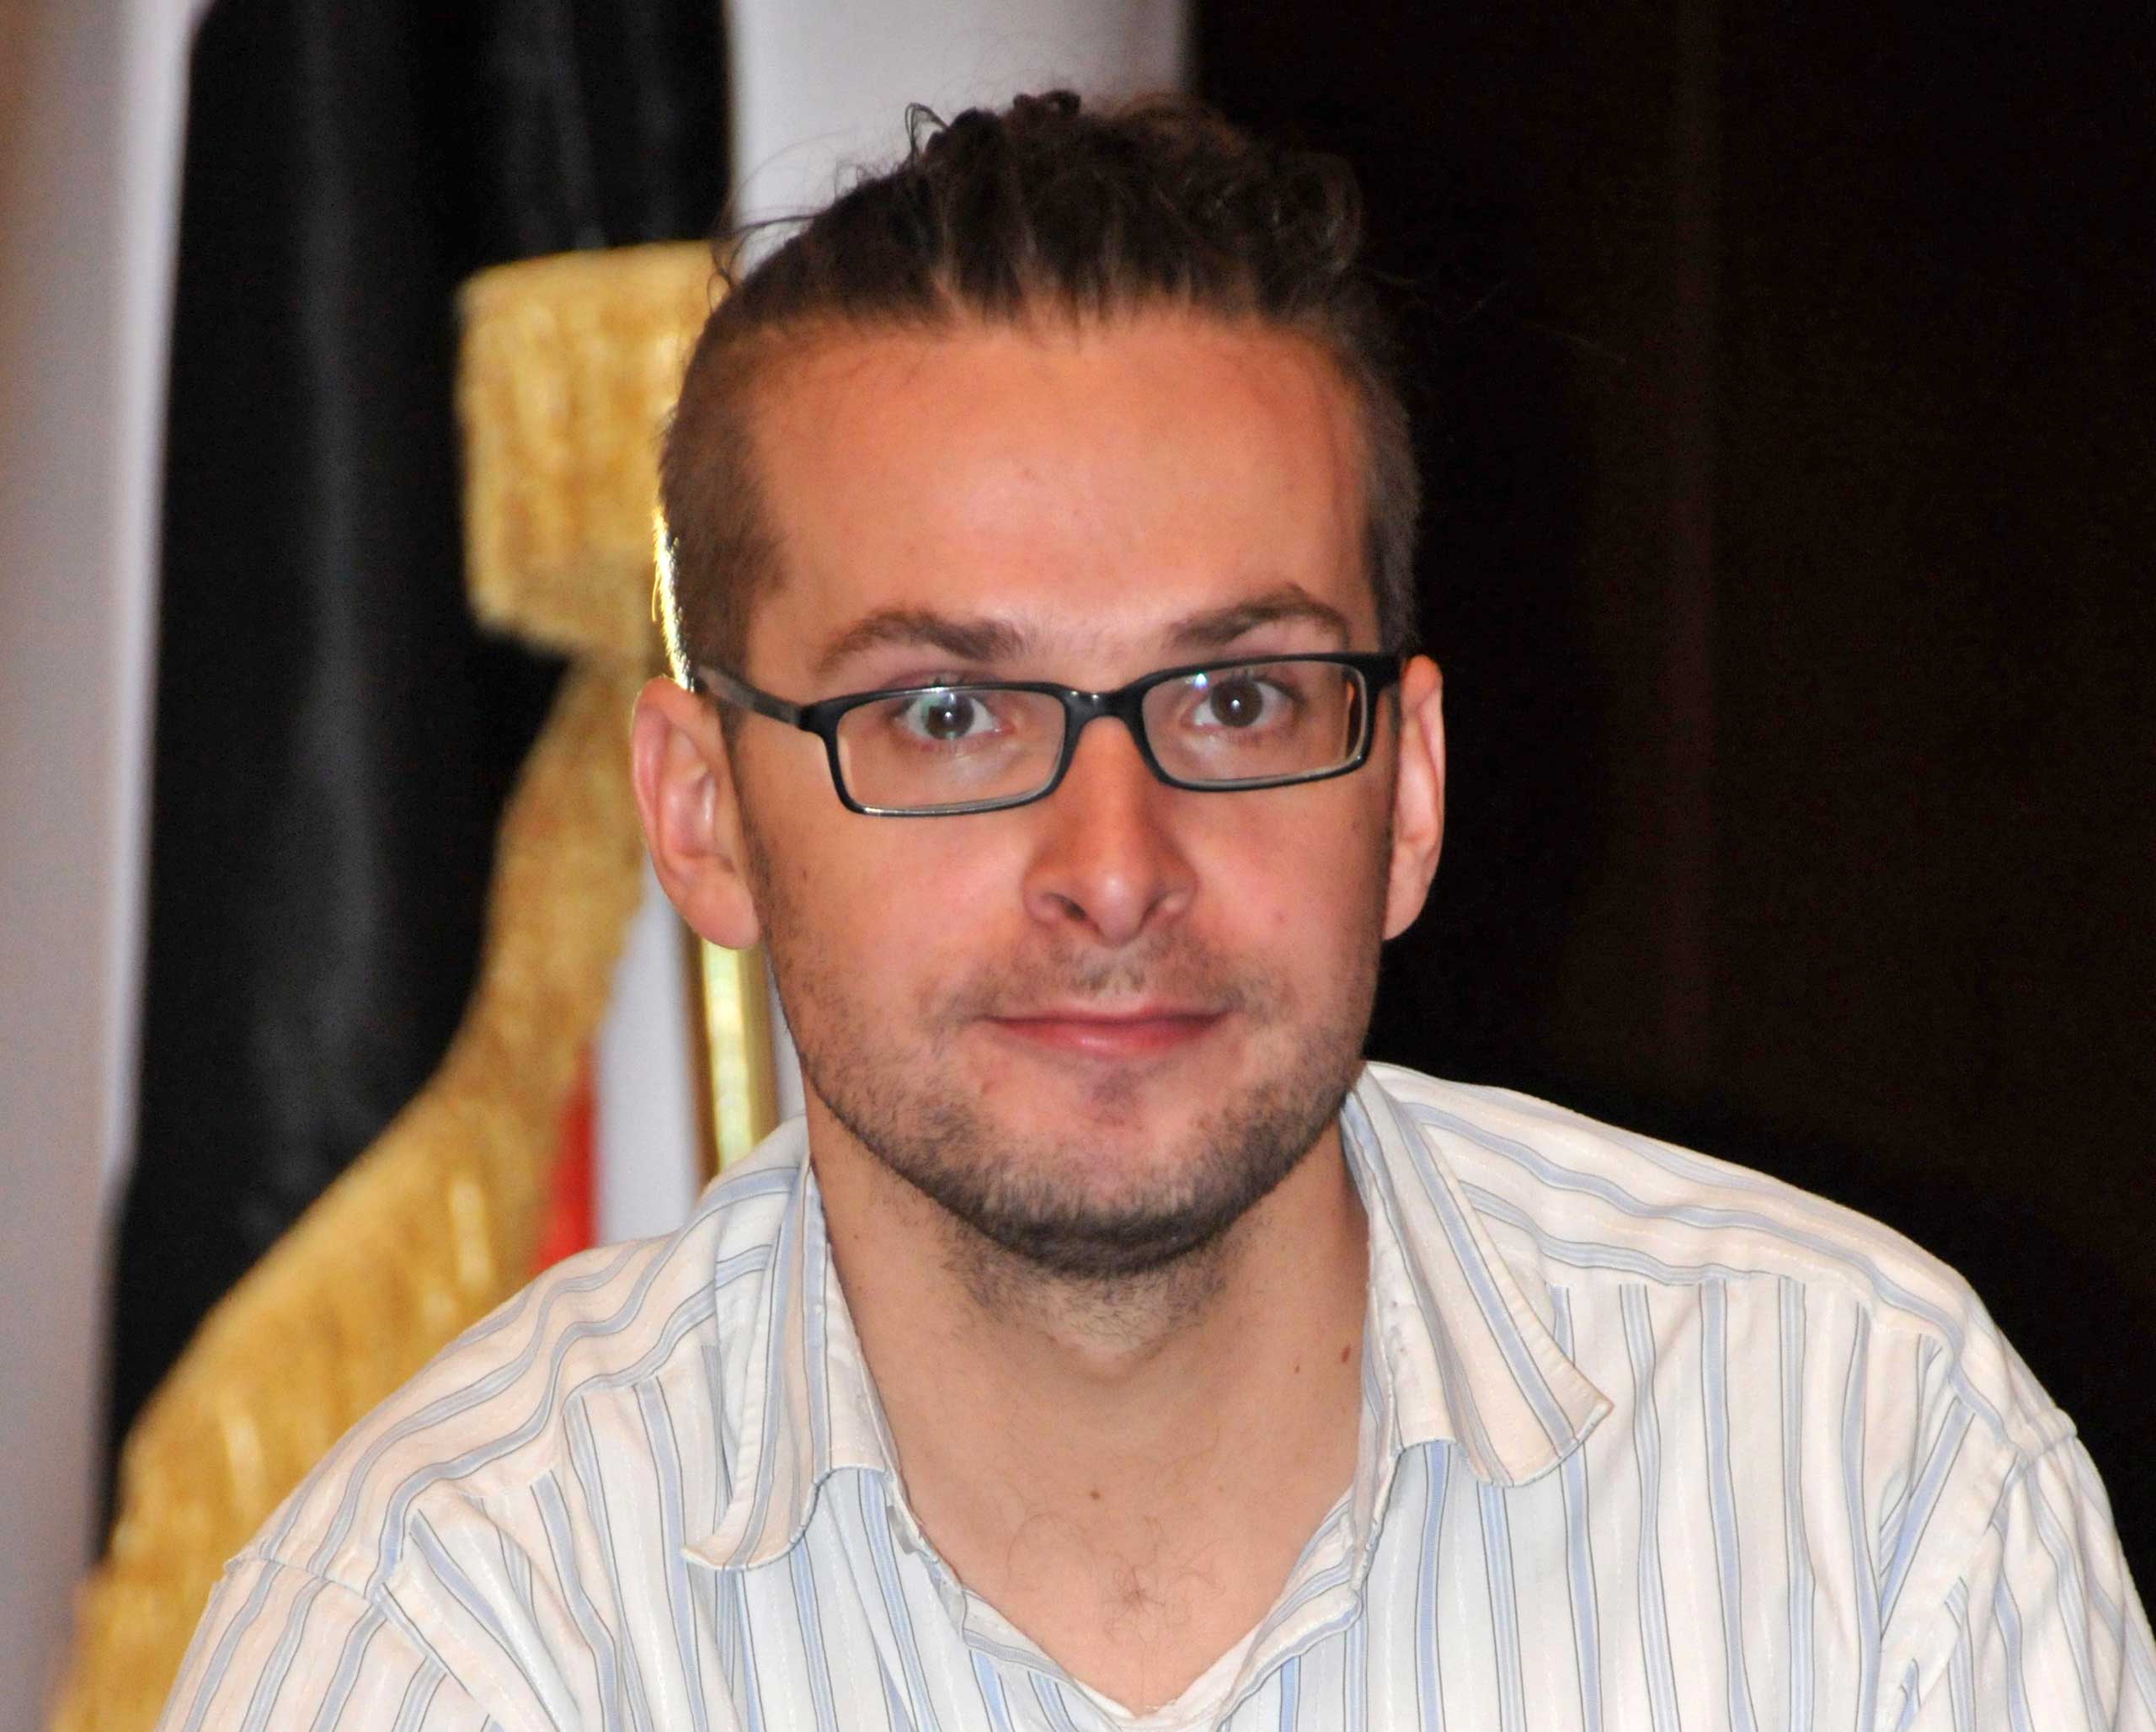 A file photograph made available Dec. 4 shows Luke Somers, a 33-year-old British born US journalist who was kidnapped by al-Qaeda's Yemen affiliate and was reportedly killed in failed rescue attempt. (Yahya Arhab—EPA)